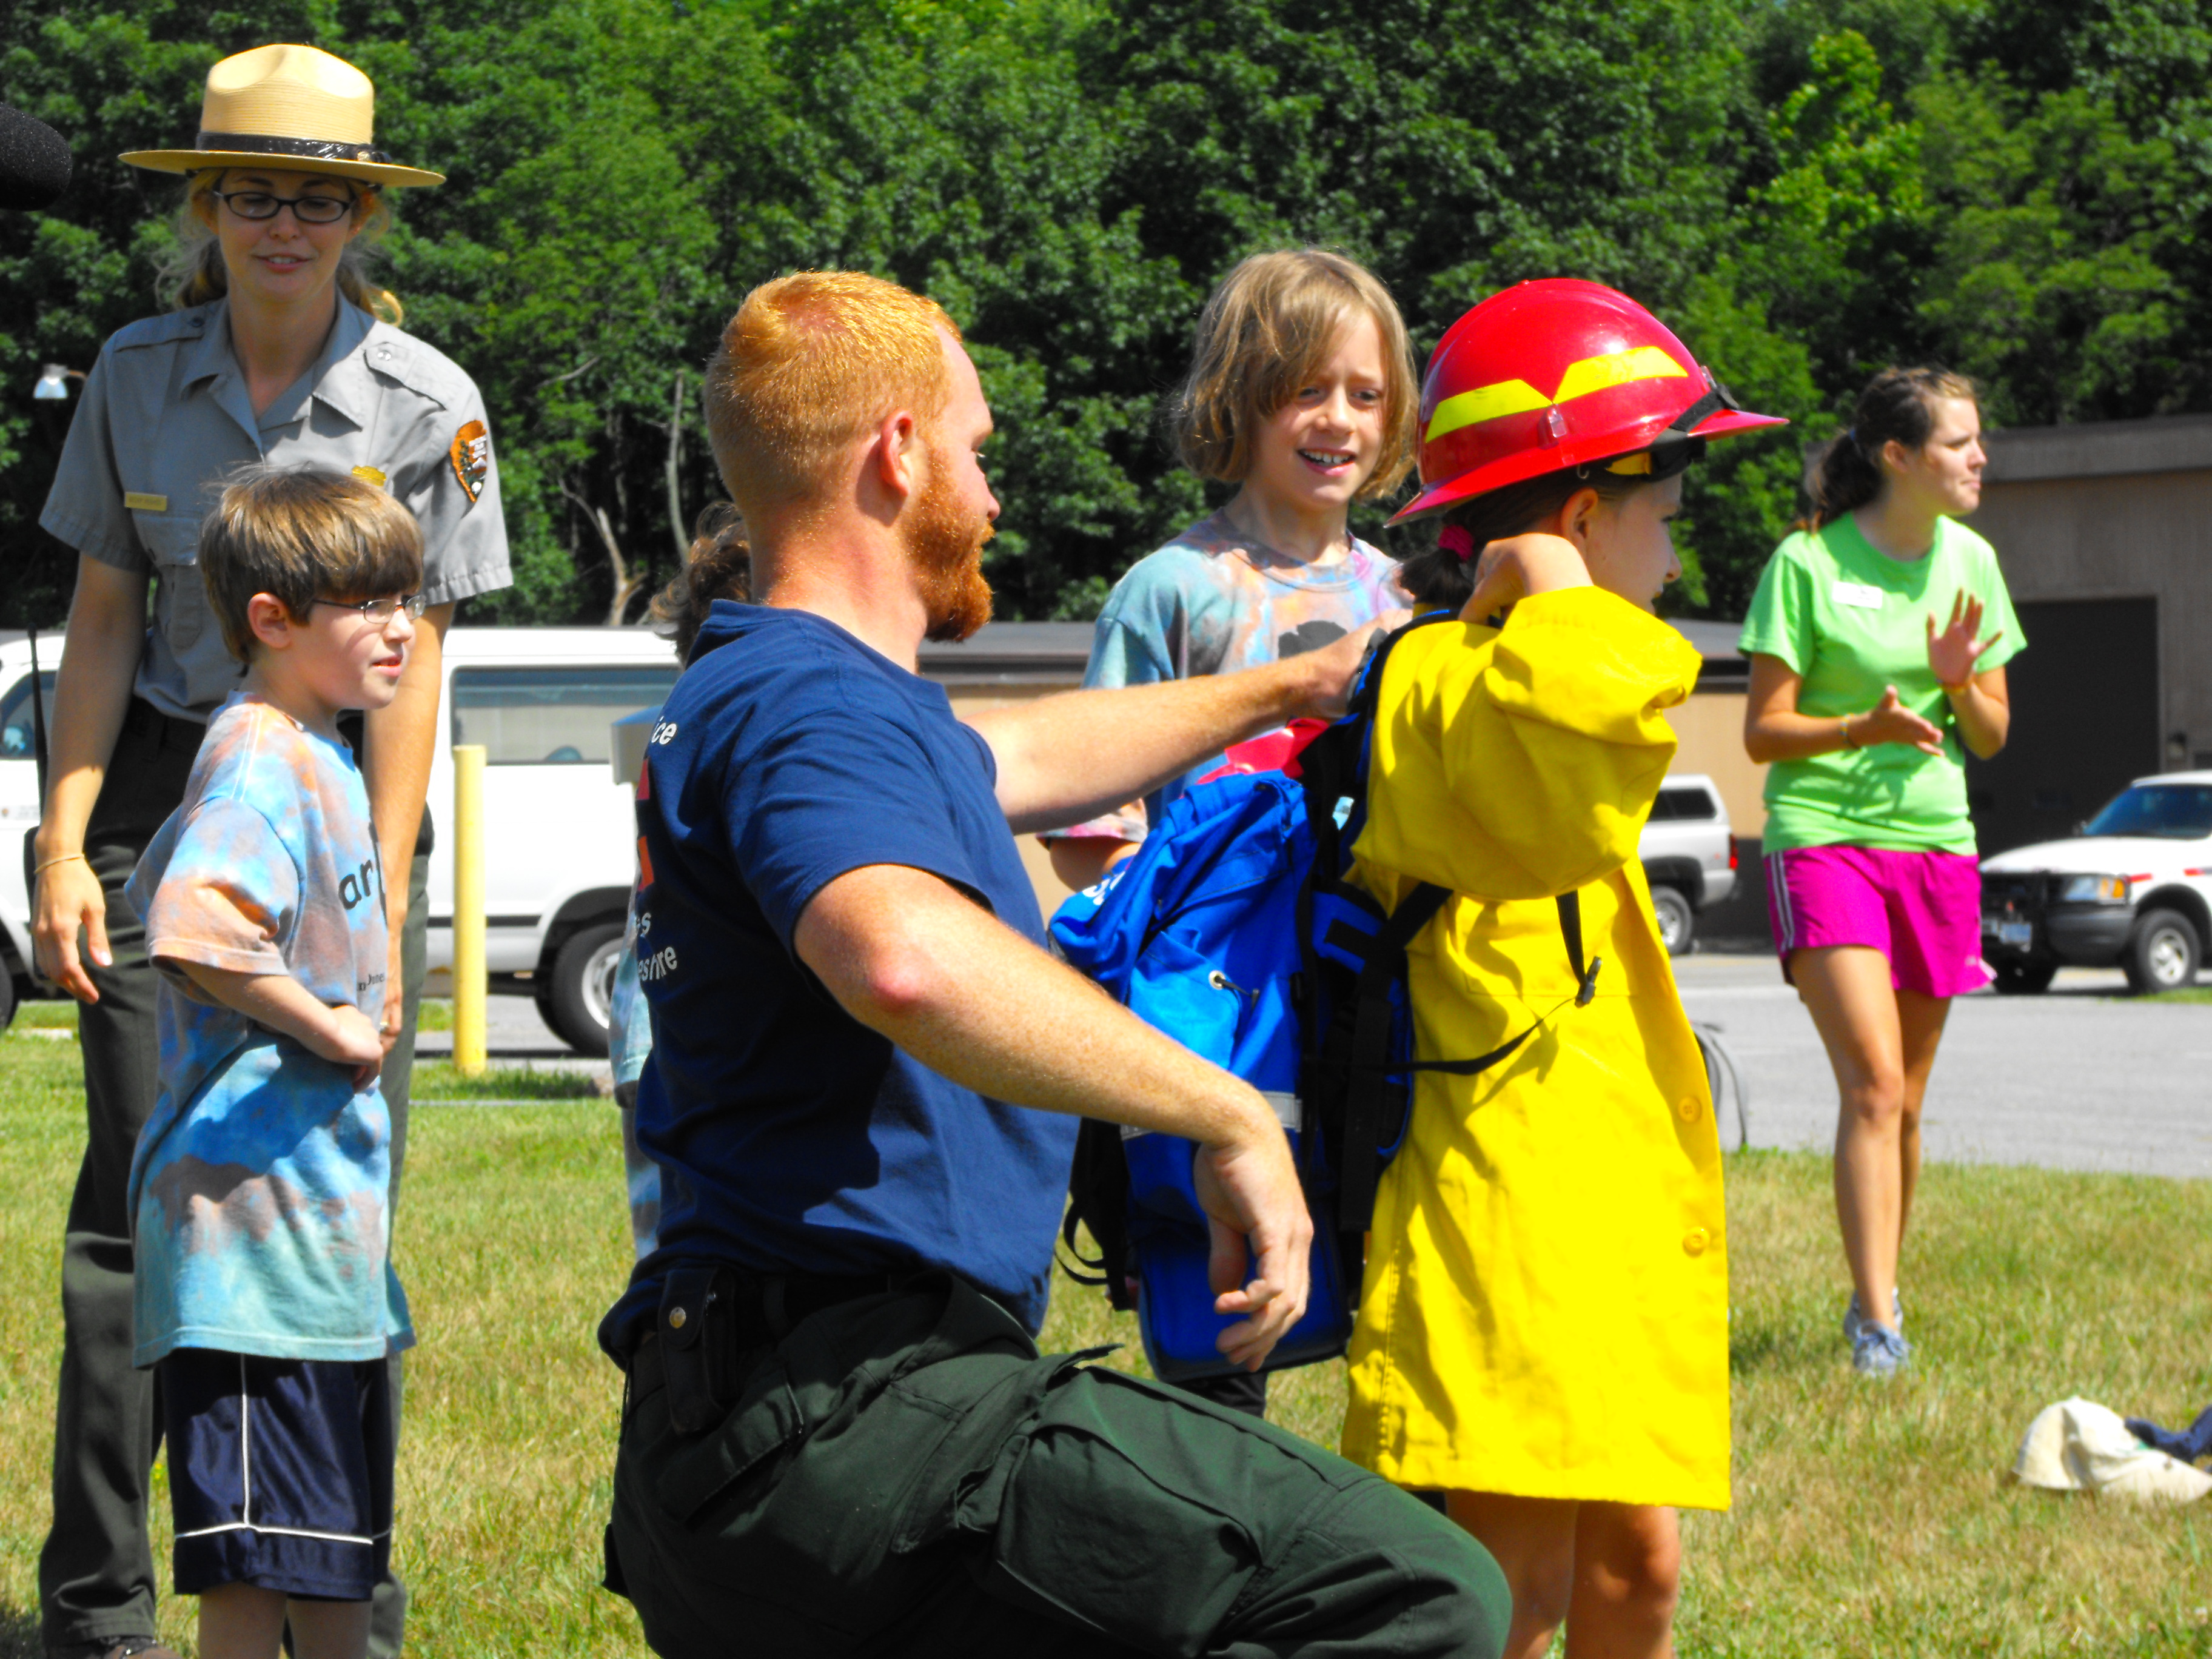 A firefighter helps a child put on a fire suit during a fire education class.